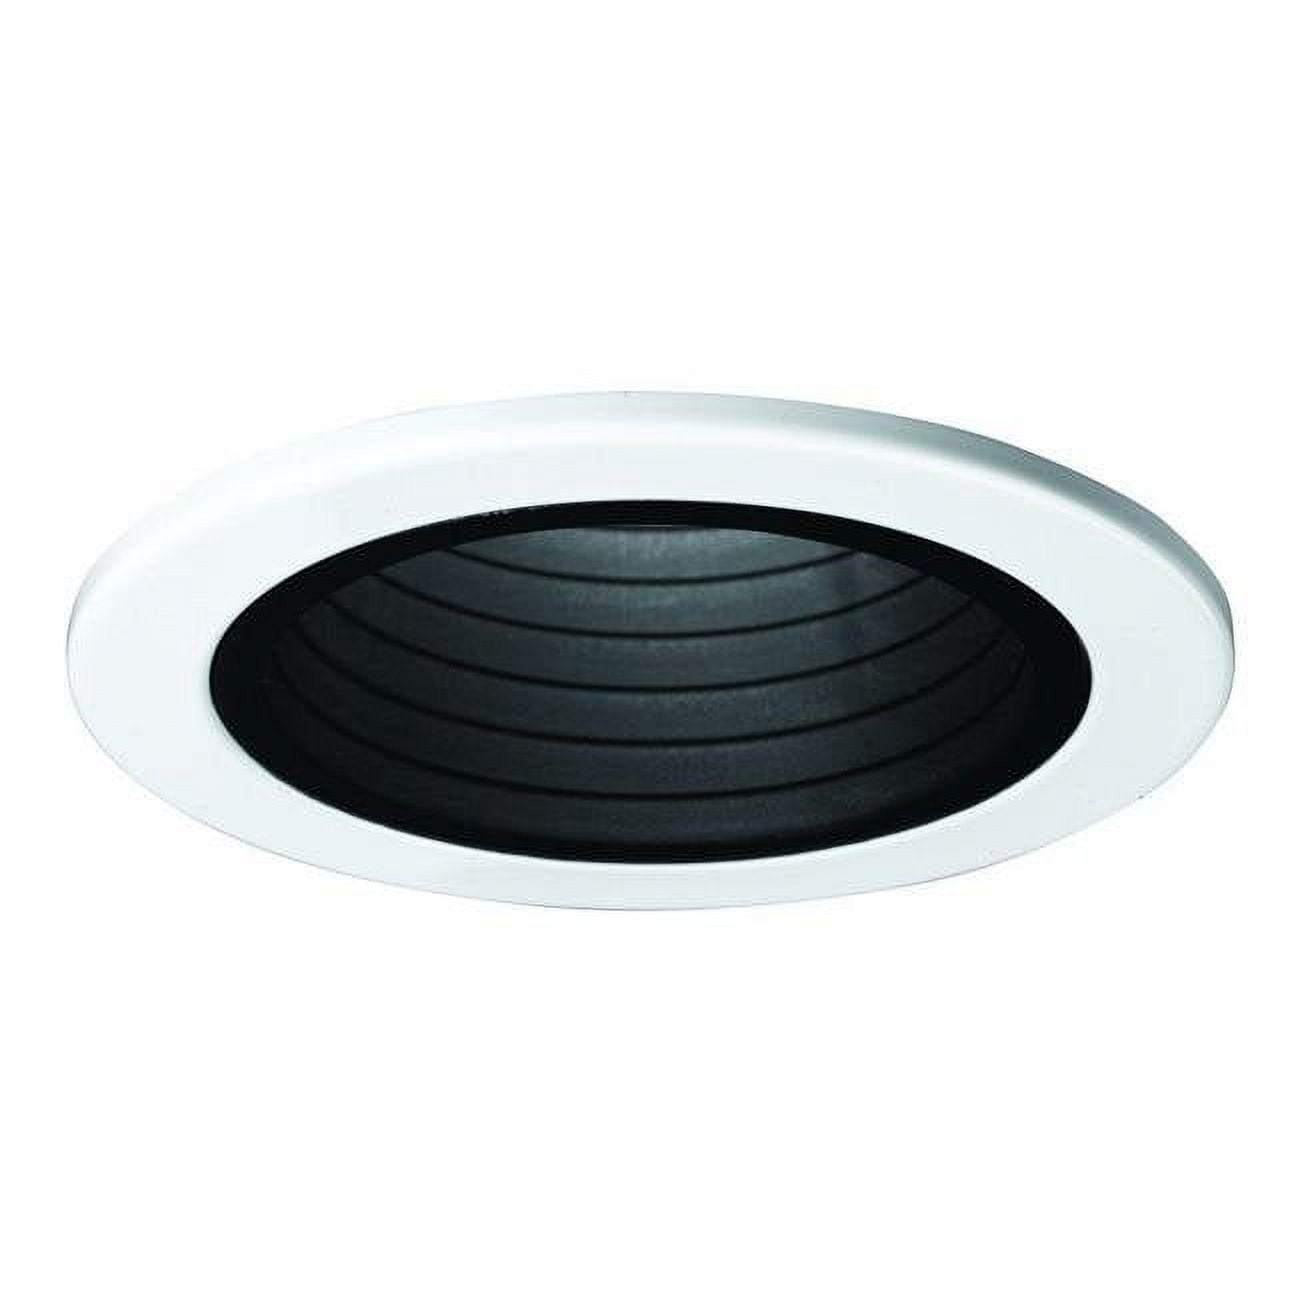 Picture of Cooper Lighting RE-4001BB 4 in. Recessed Lighting Plastic Step Baffle with White Trim Ring - Black